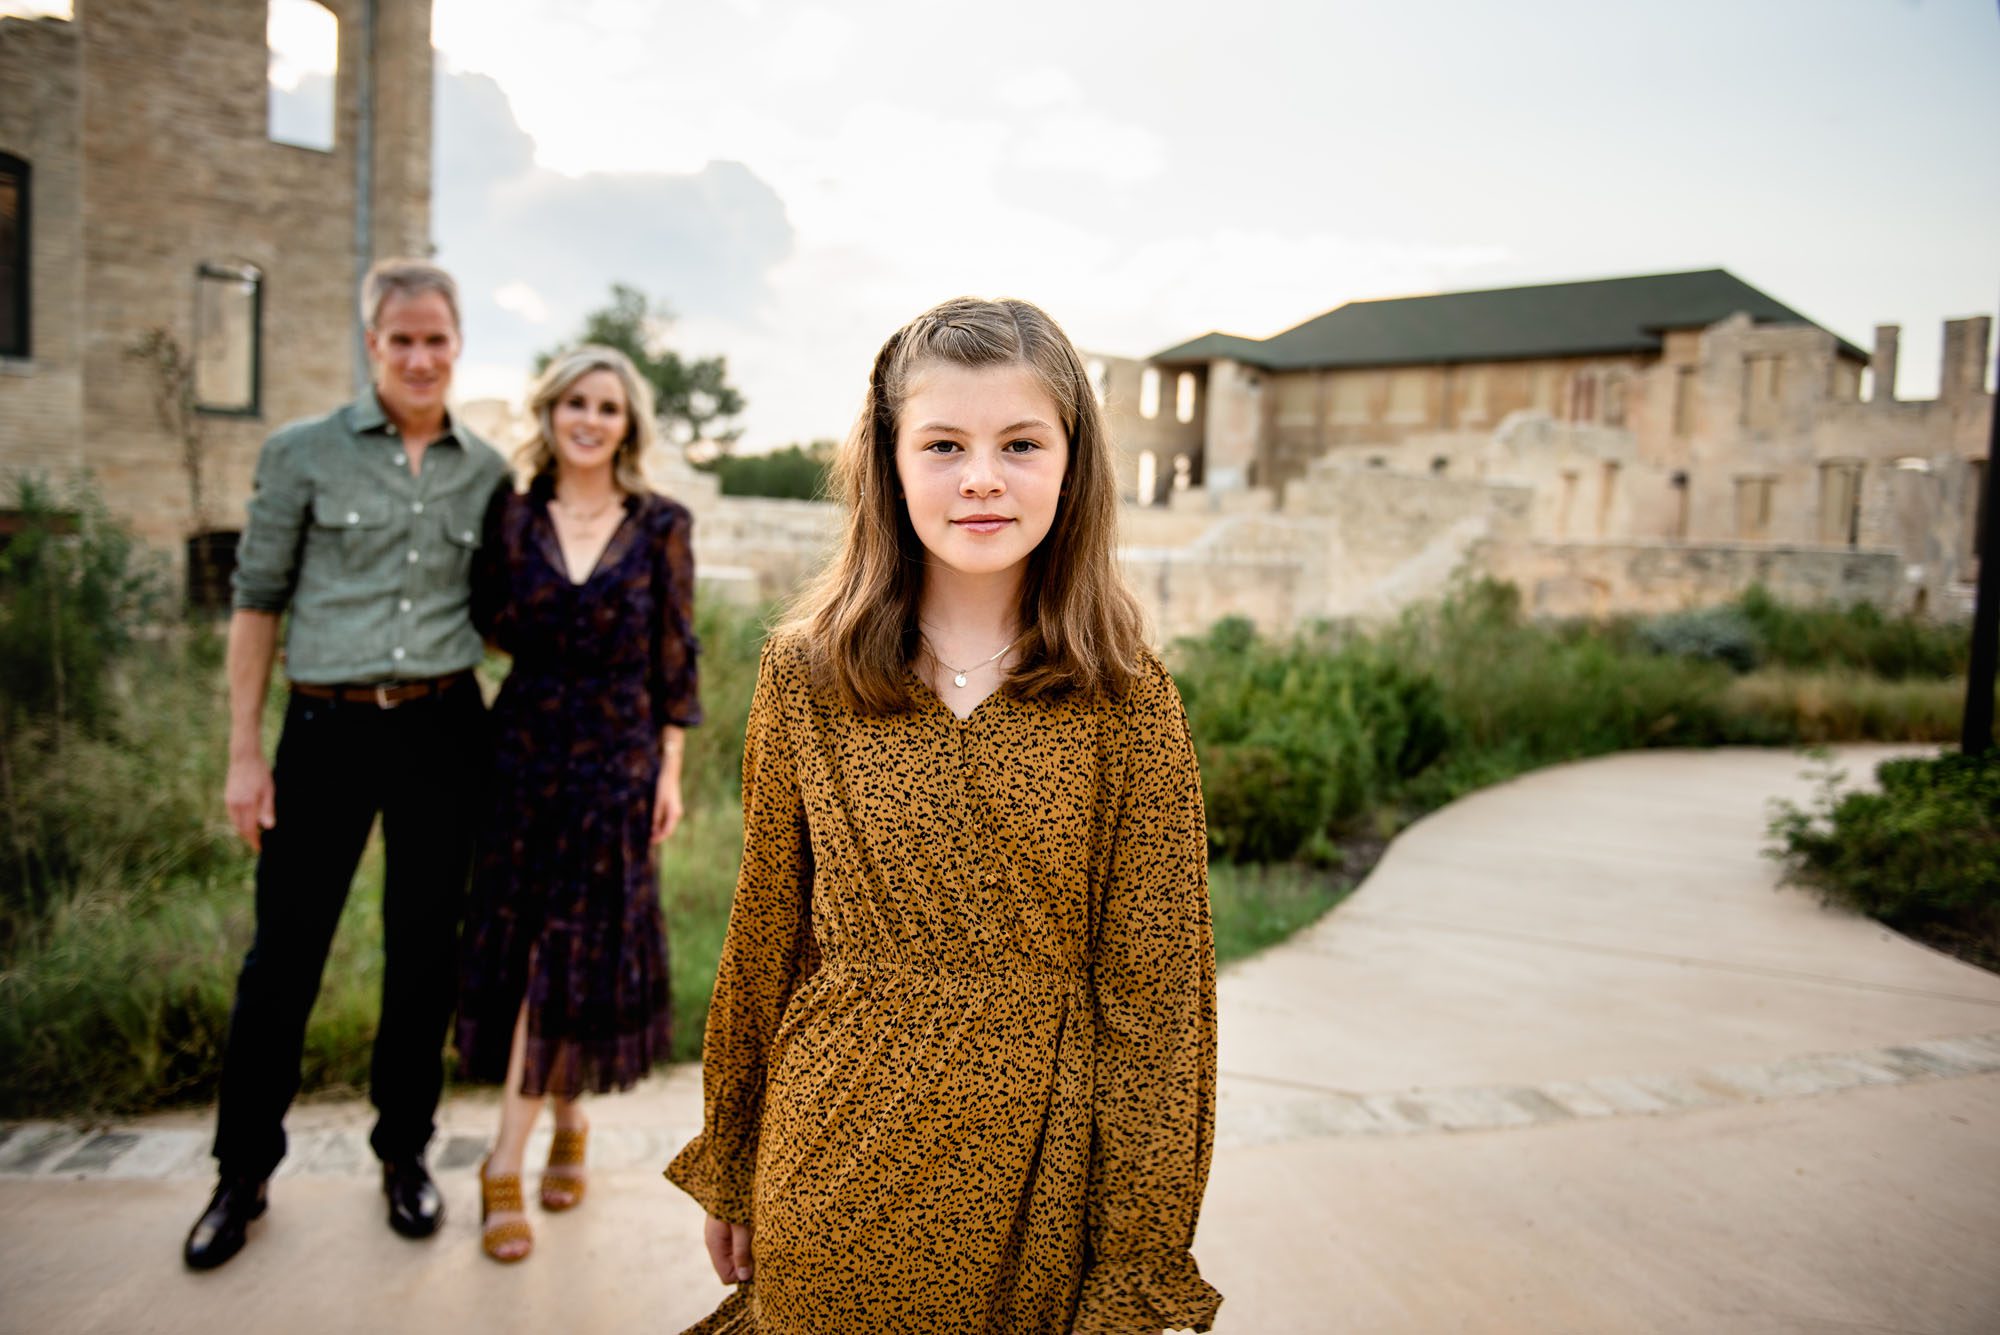 Girl standing with parents in the background, Best San Antonio Lifestyle Photographer